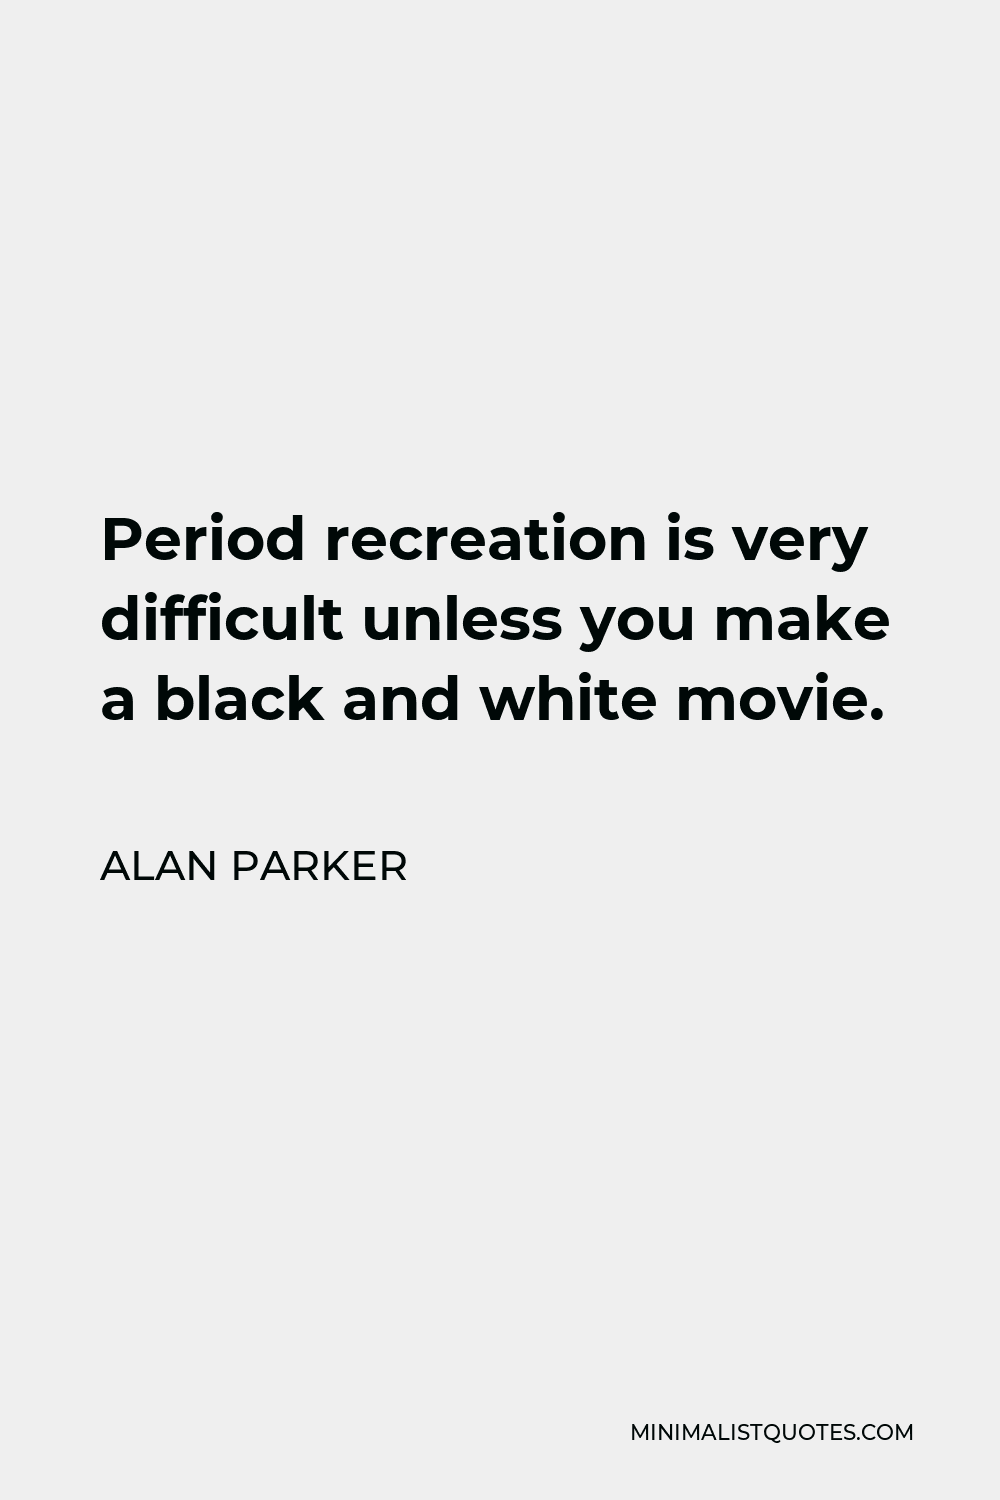 Alan Parker Quote - Period recreation is very difficult unless you make a black and white movie.